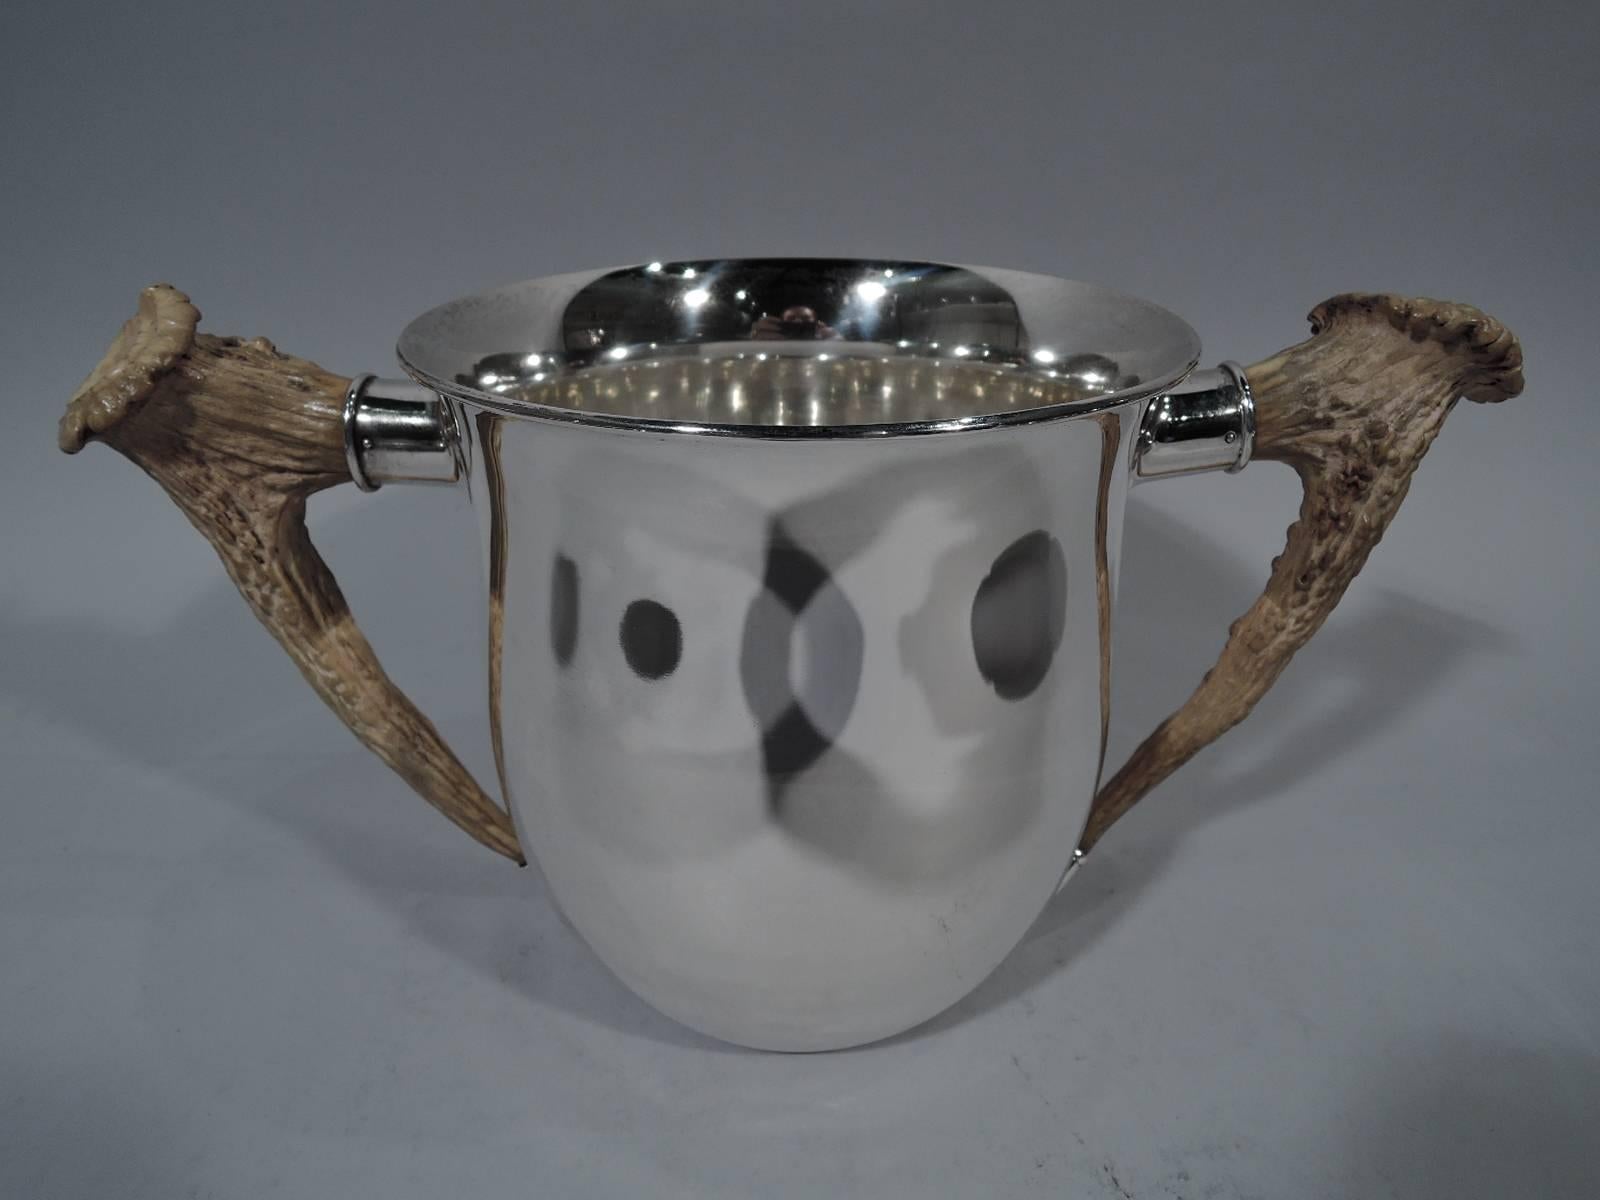 Sterling silver trophy cup with horn handles. Made by Gorham in Providence, ca 1890. Urn with flared rim. Horn side handles set in silver mounts. Holds 4 3/4 pints of bubbly. Very alpha – very much a first prize. Late 19th century hallmark includes